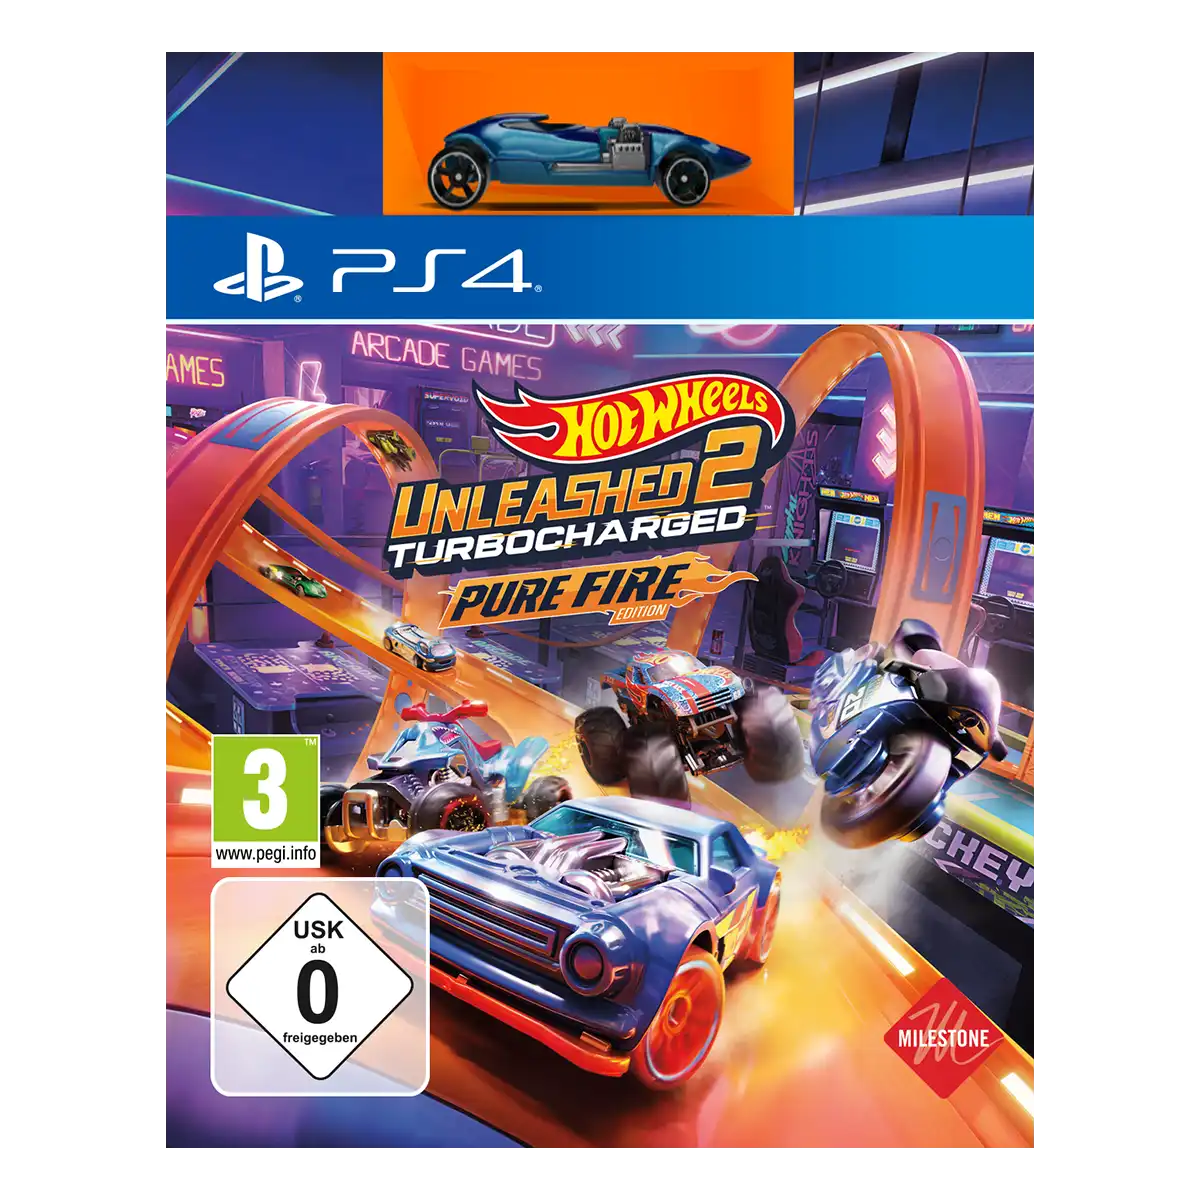 Hot Wheels Unleashed™ 2 Turbocharged Pure Fire Edition (PS4) Cover